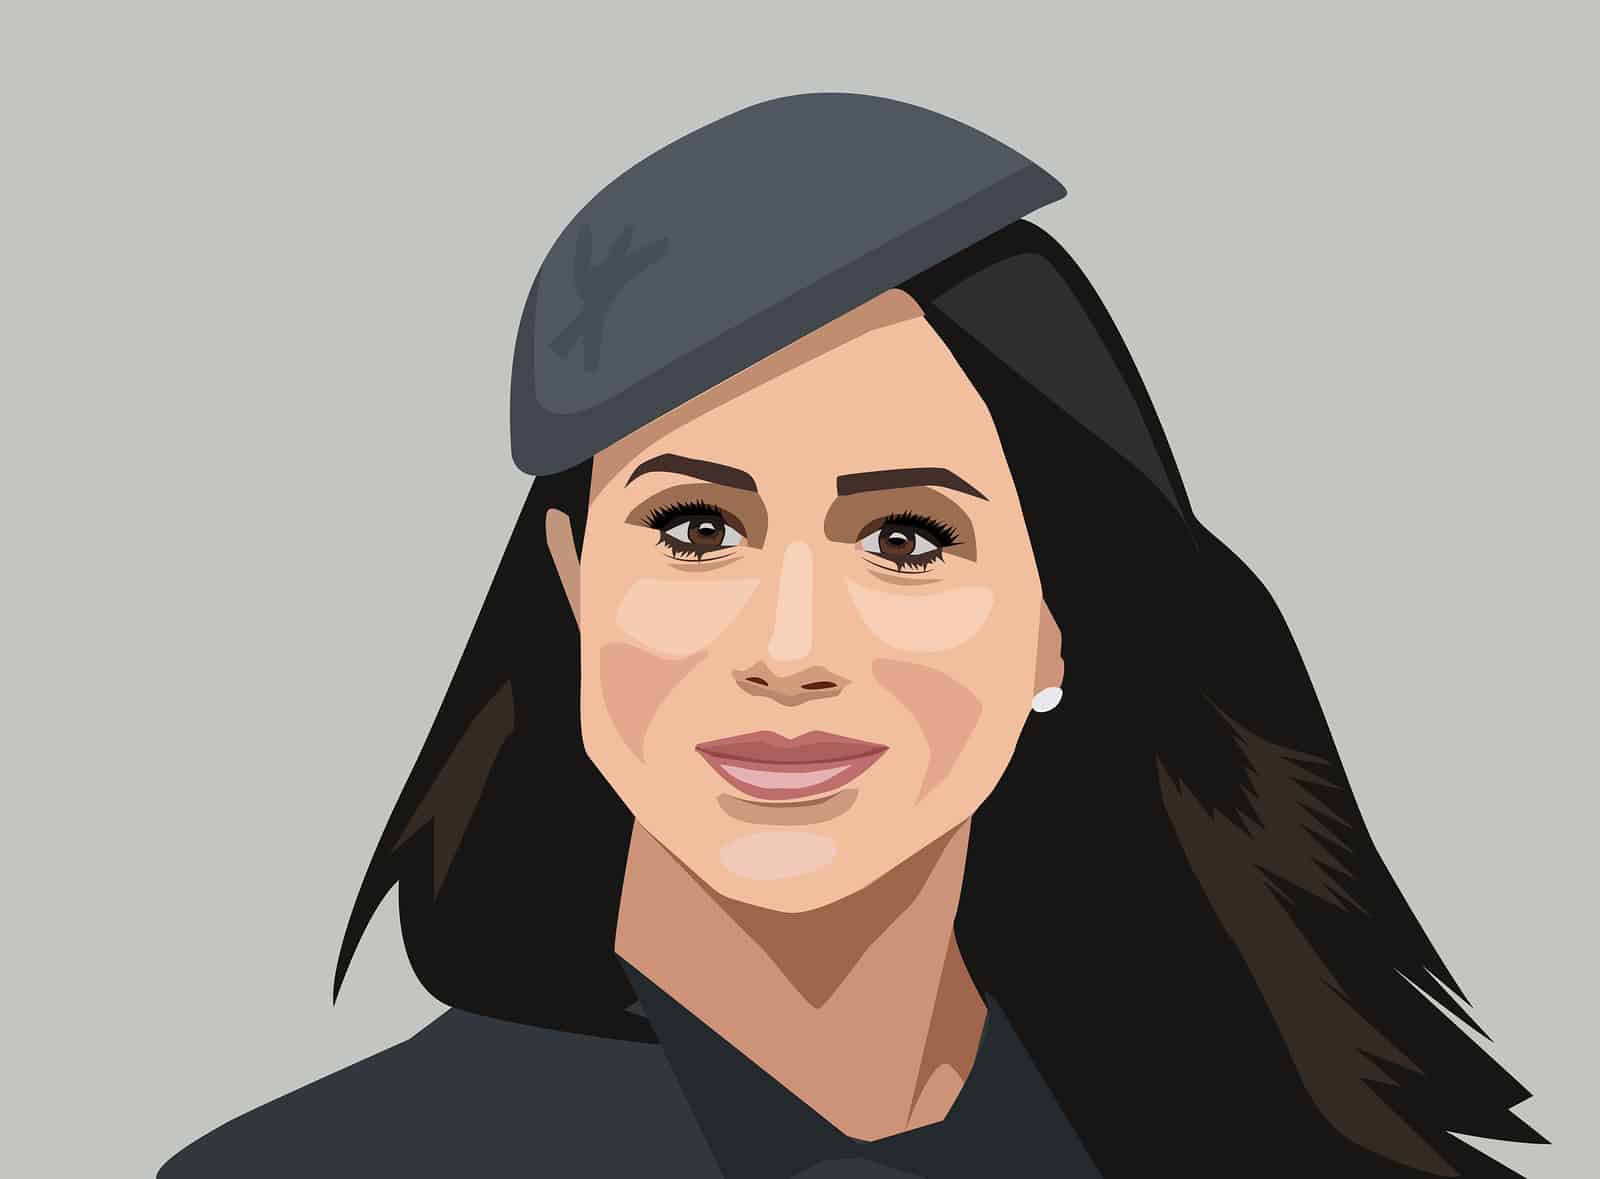 Duchess of Sussex. Meghan Markle